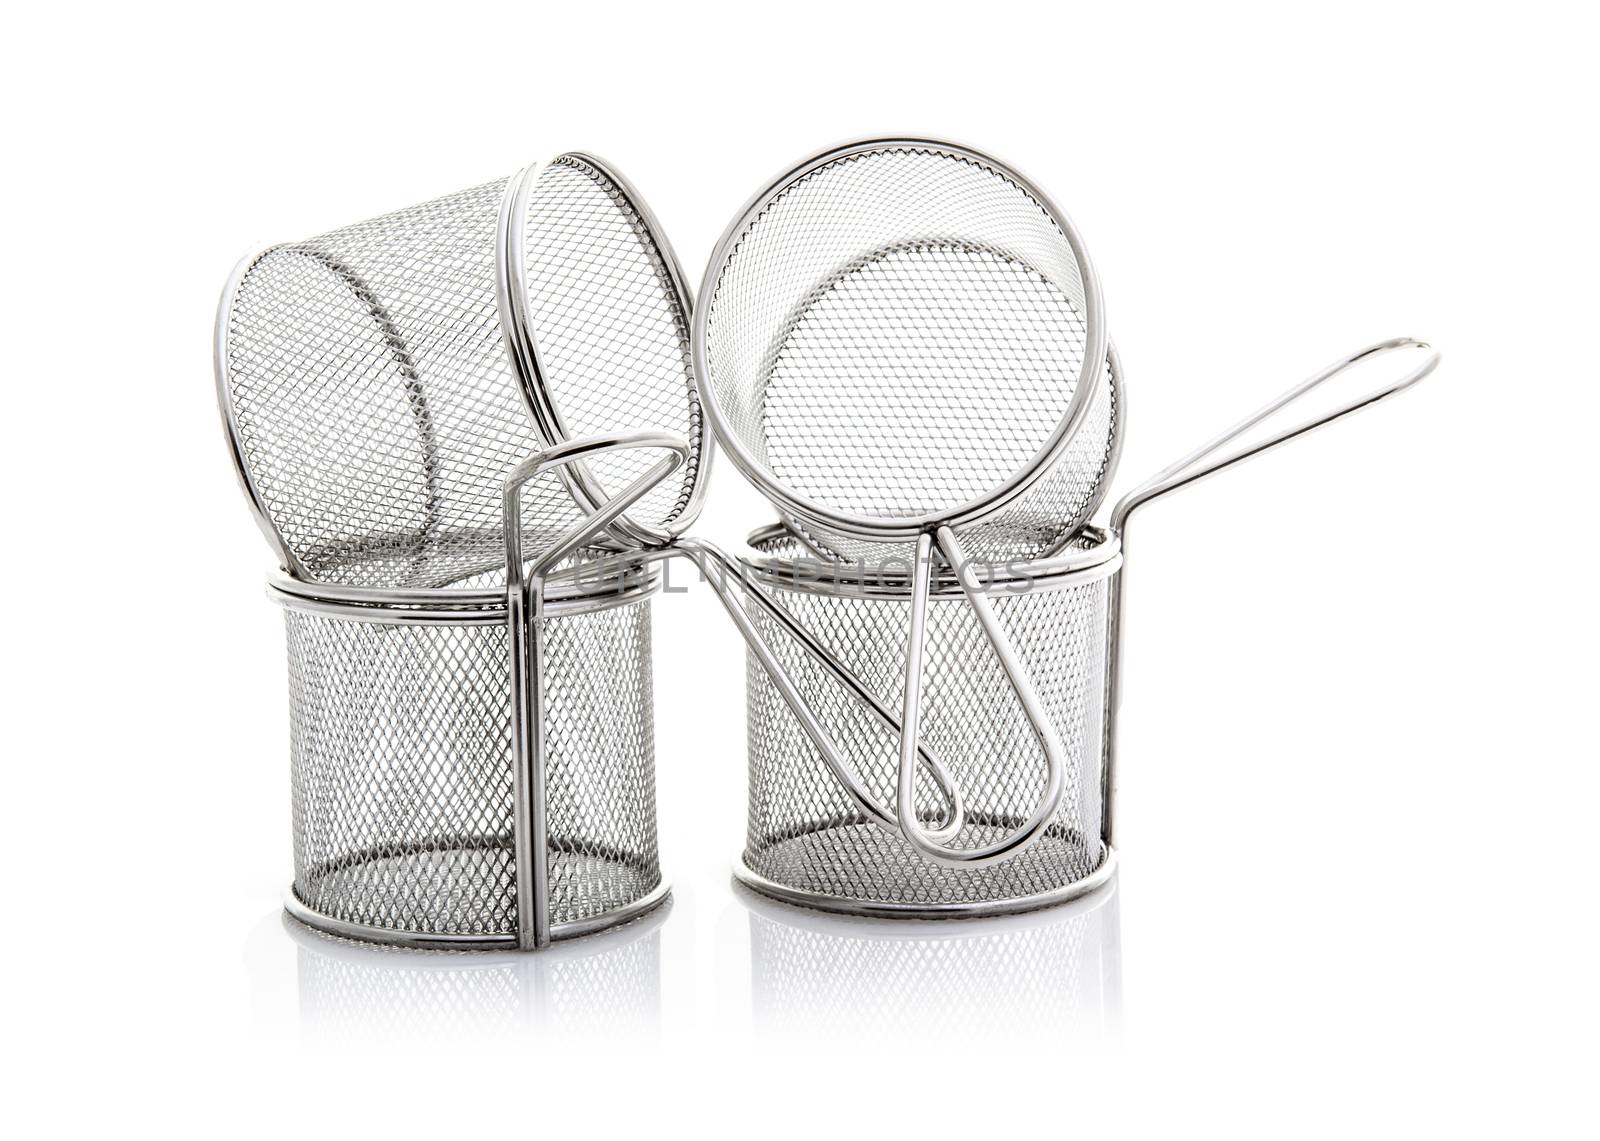 Four Empty Stainless Steel Wire Chip Baskets on a White Background